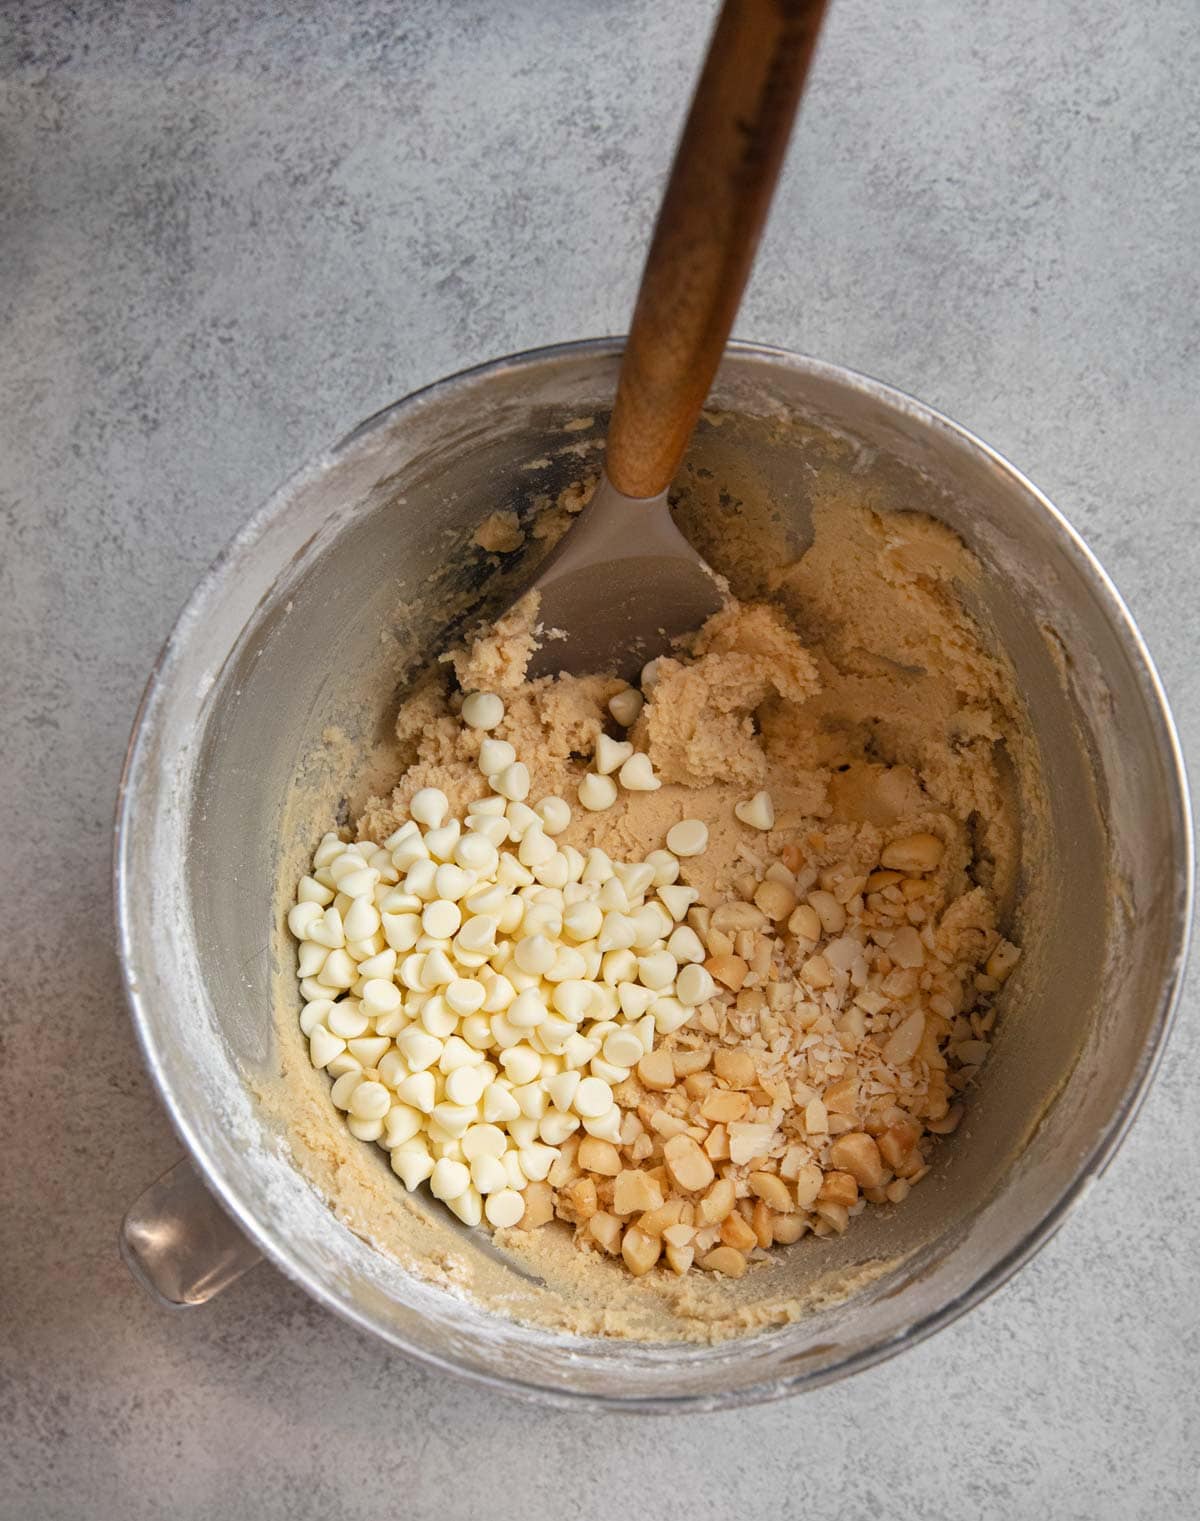 White Chocolate Macadamia Chip Cookies ingredients in mixing bowl